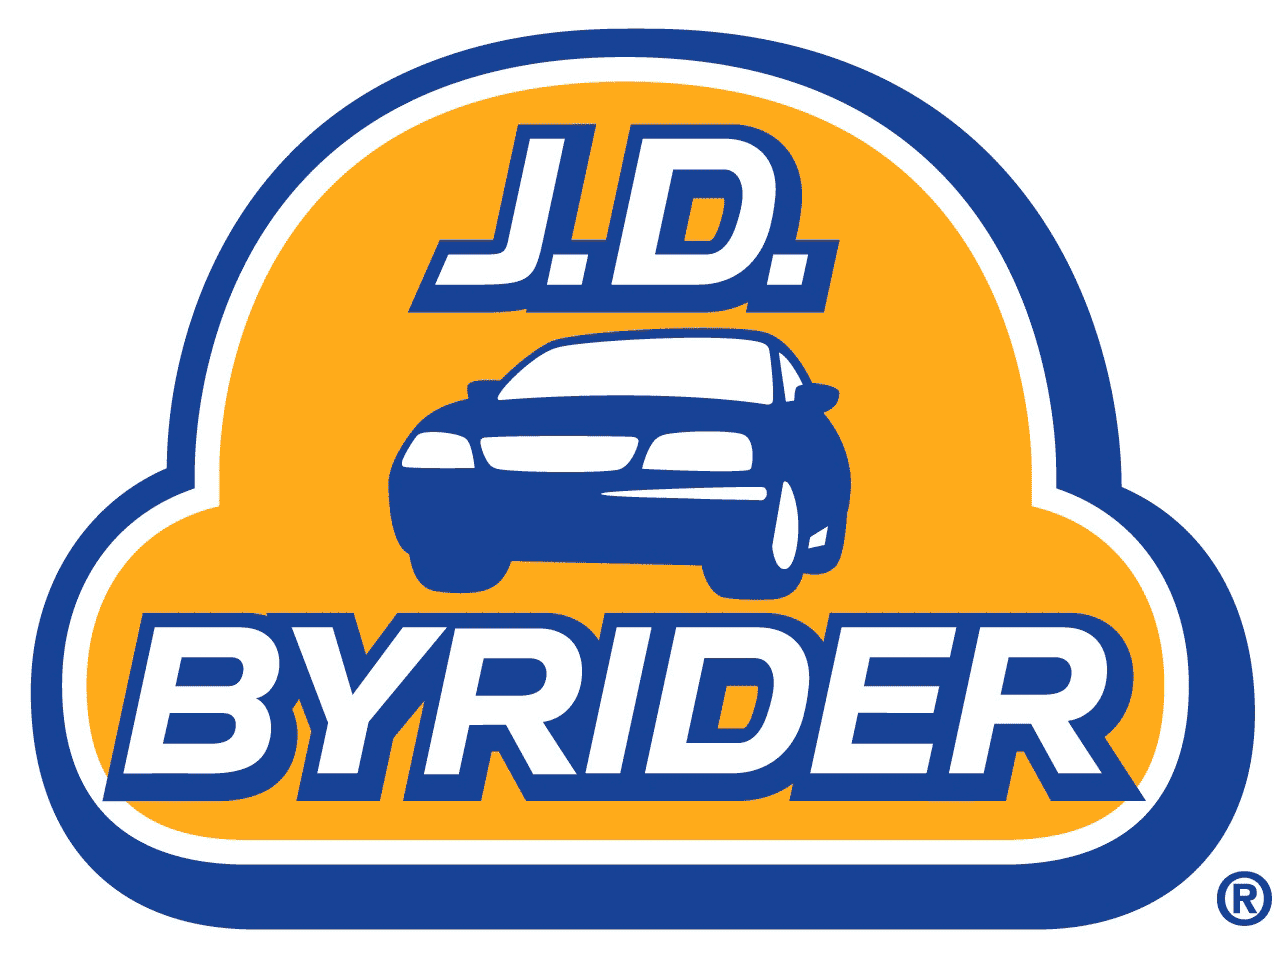 "J.D. Byrider logo with blue car silhouette on a golden backdrop."